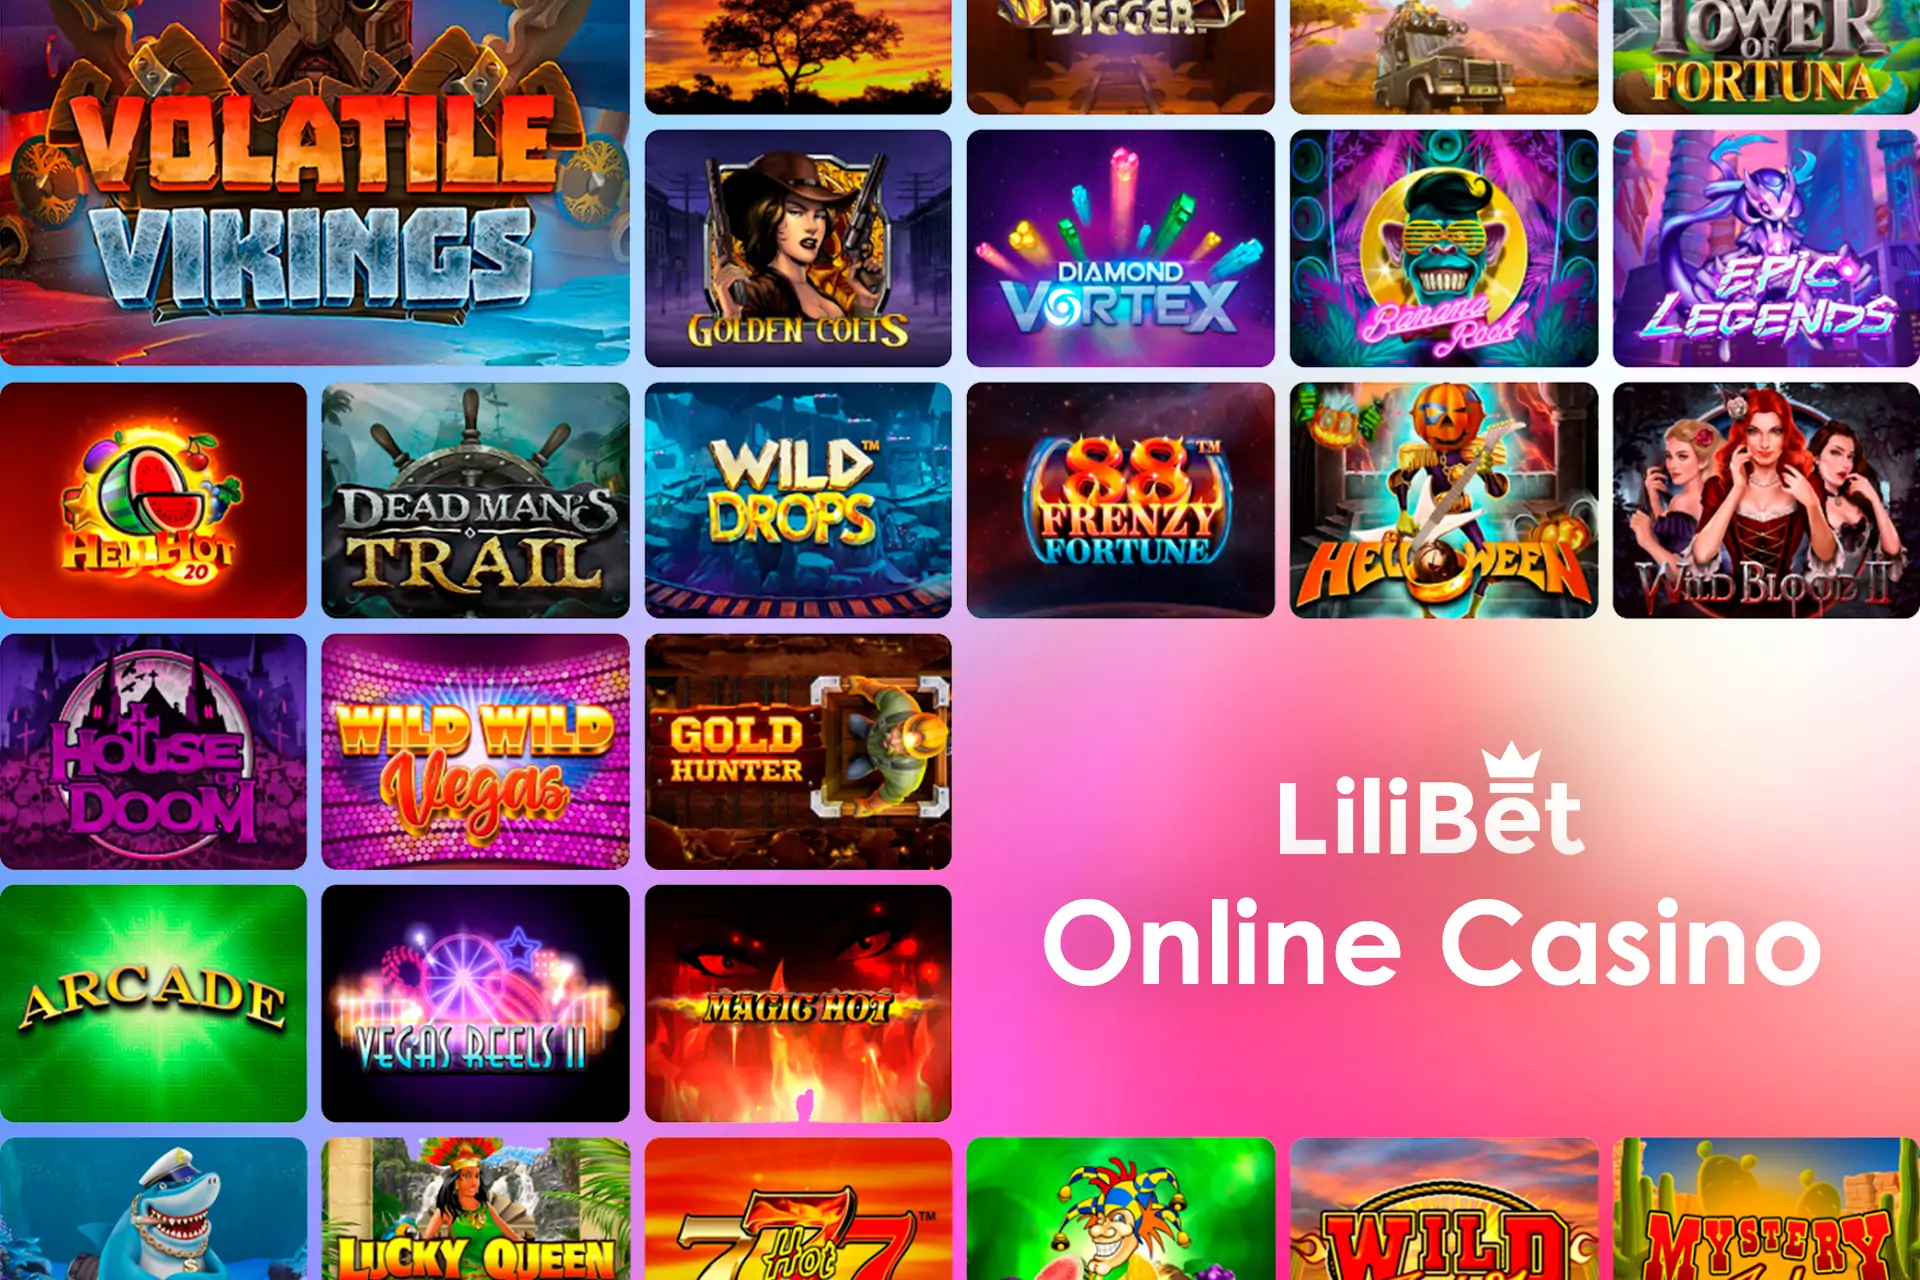 In the Lilibet Casino, you can play slots and live table games with a dealer.